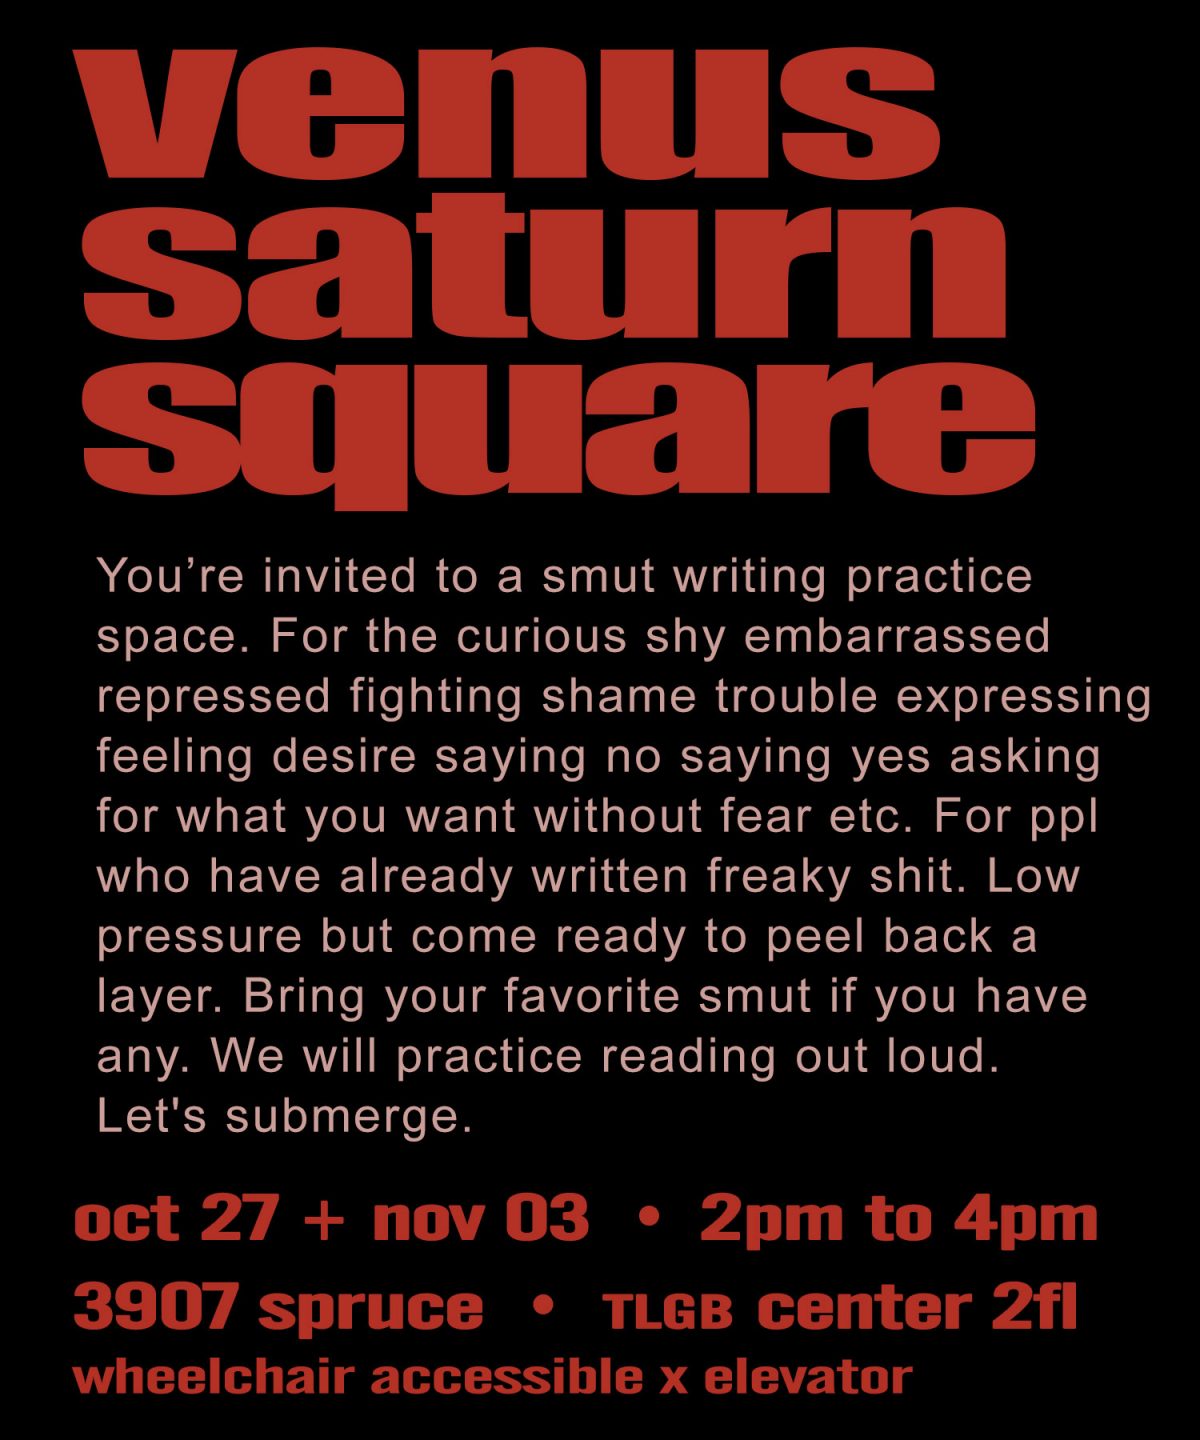 VENUS SATURN SQUARE call for submissions